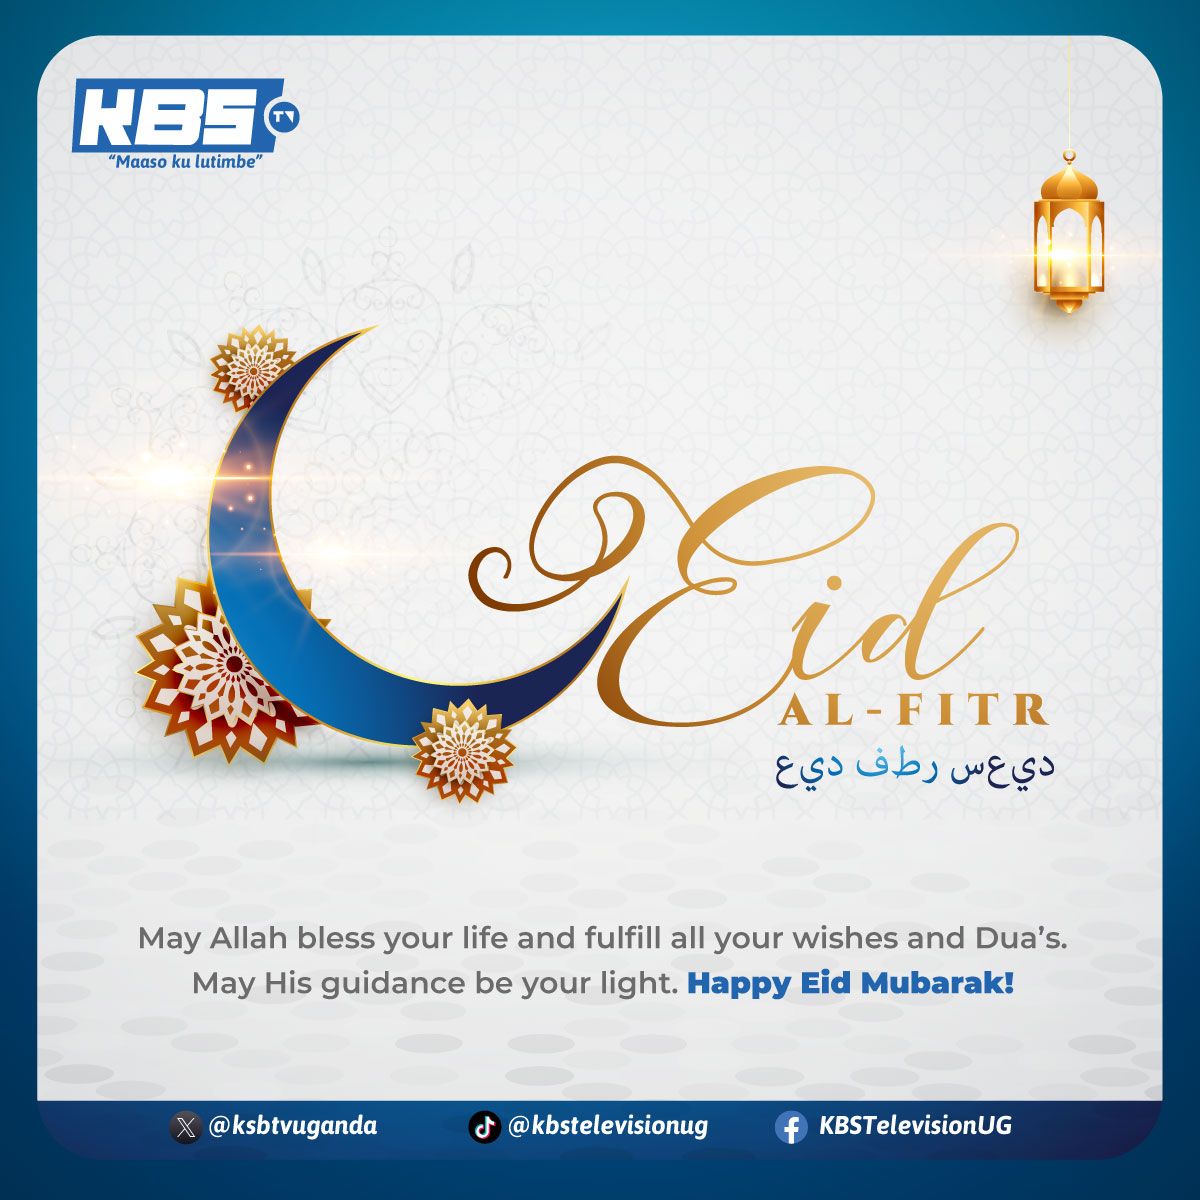 #EidMubarak to all our Muslims